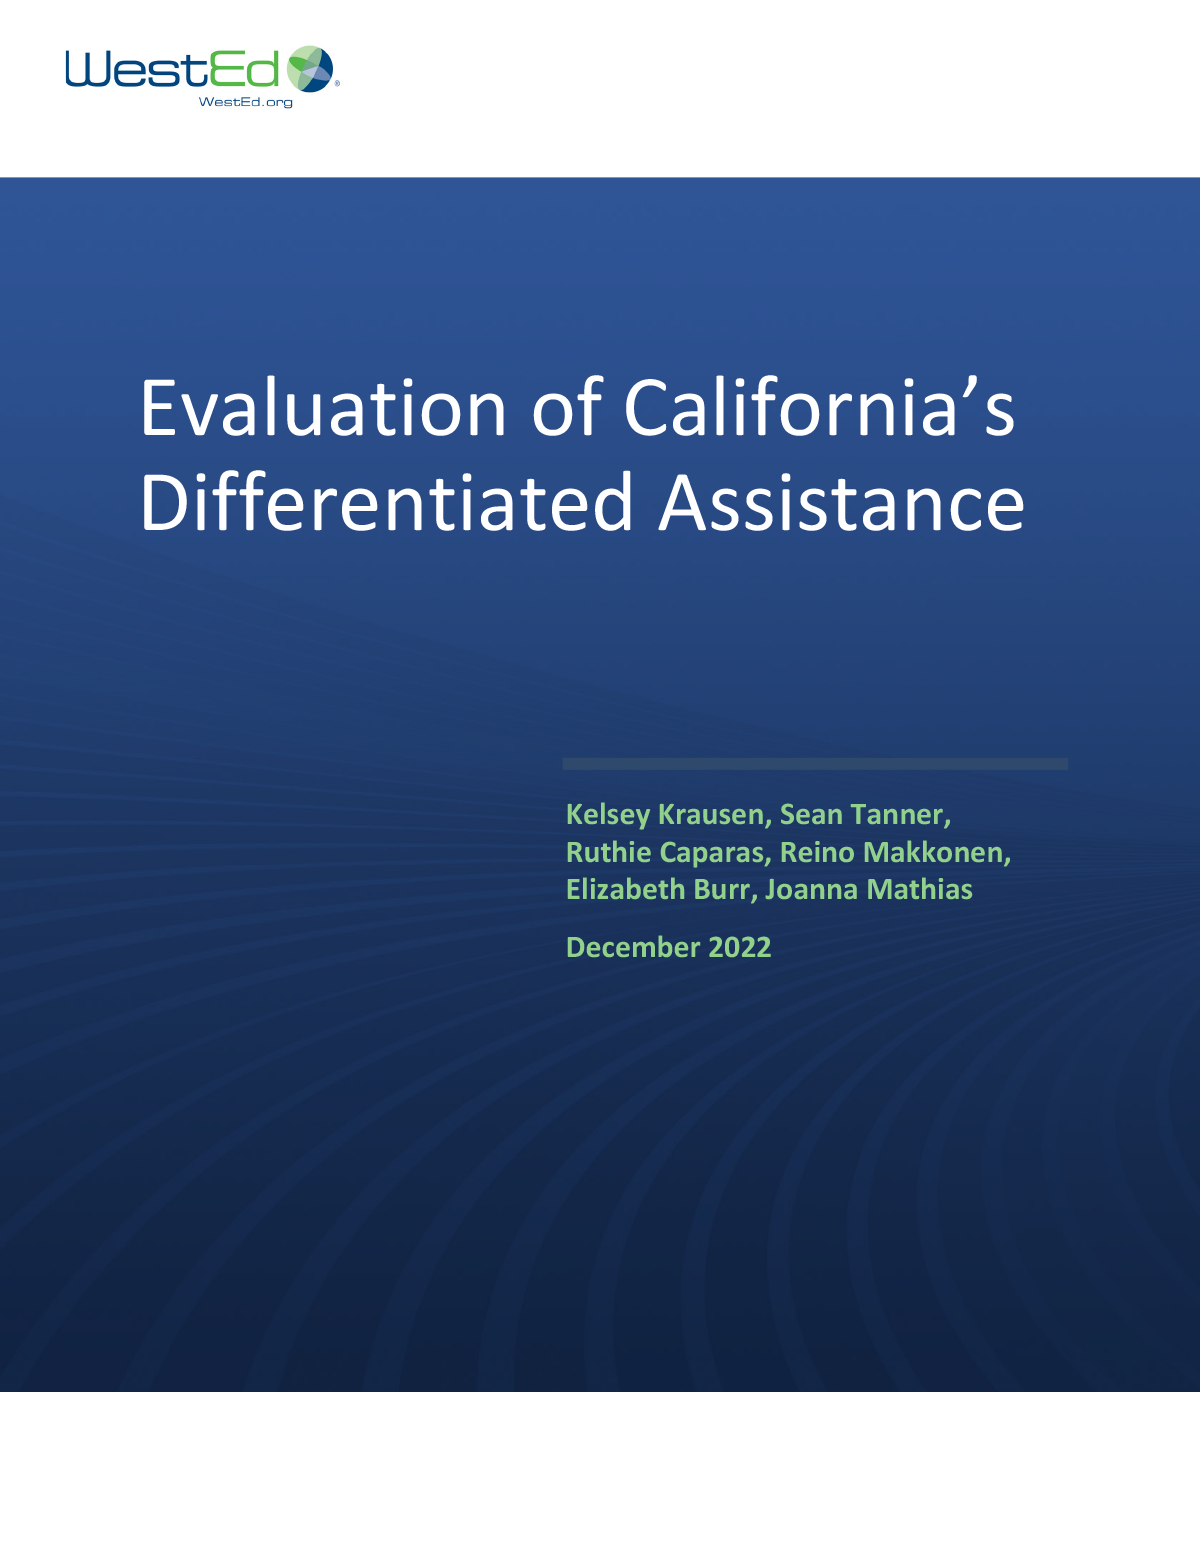 Evaluation of California's Differentiated Assistance